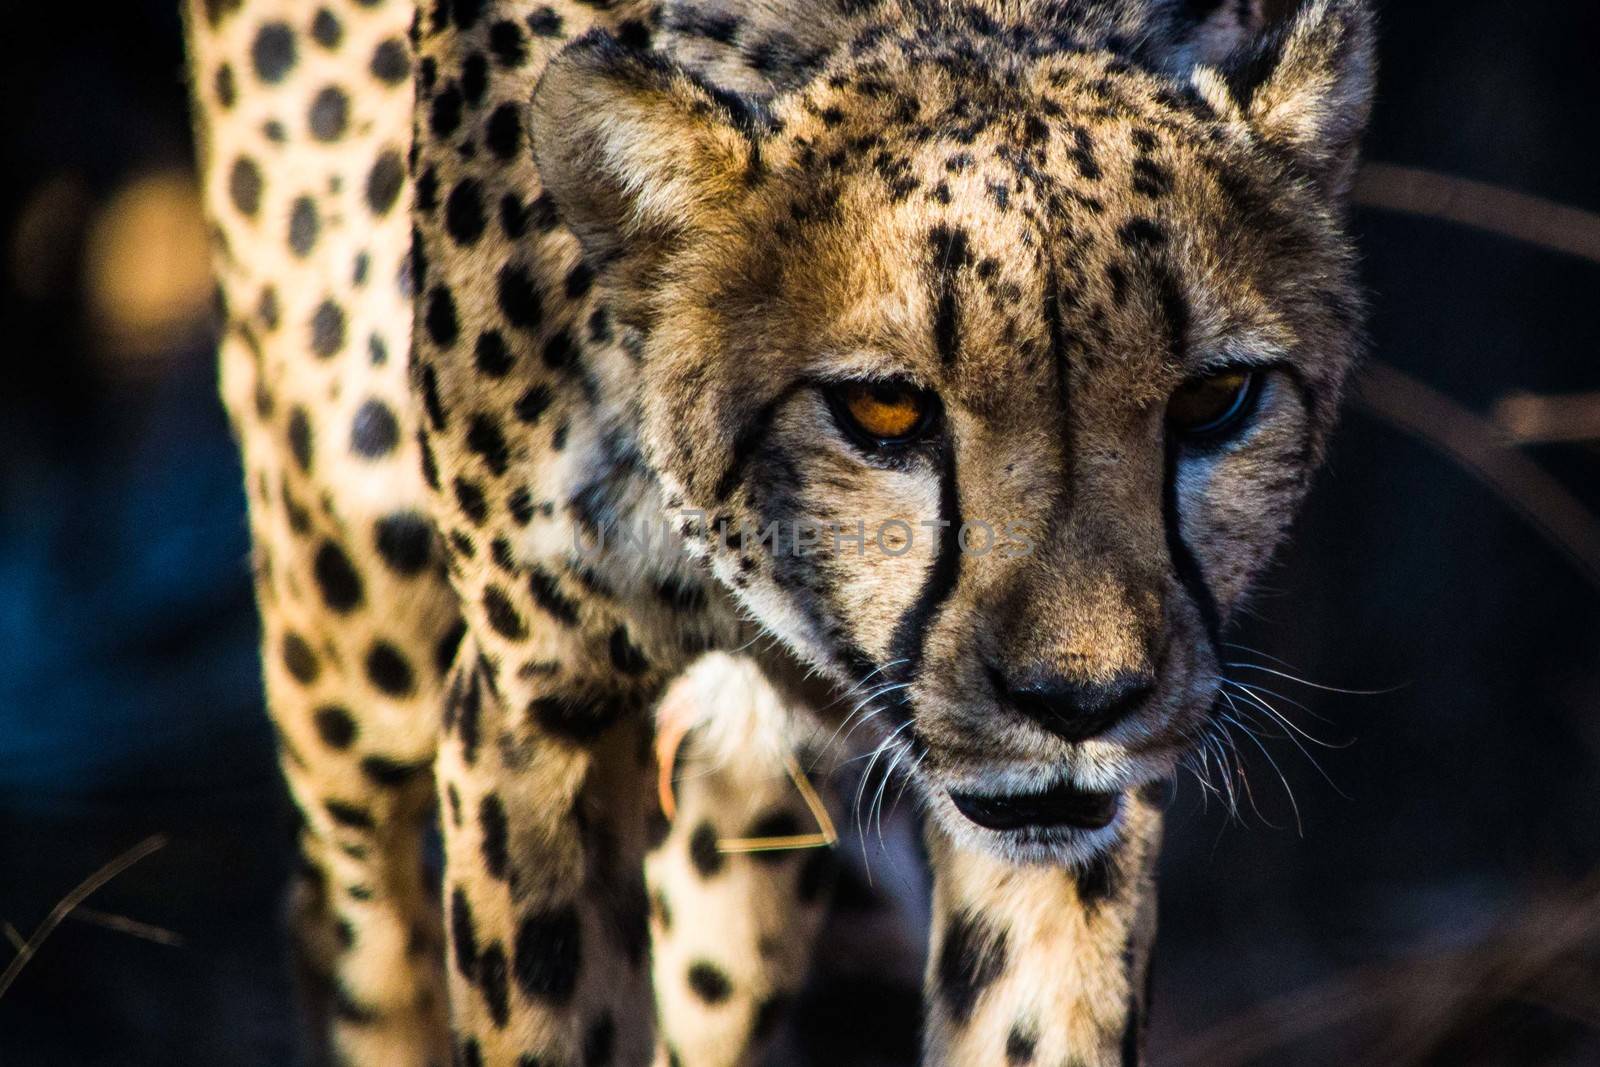 close-up encounter of a walking and alerted, concentrated cheetah during a safari trip in Africa by kb79